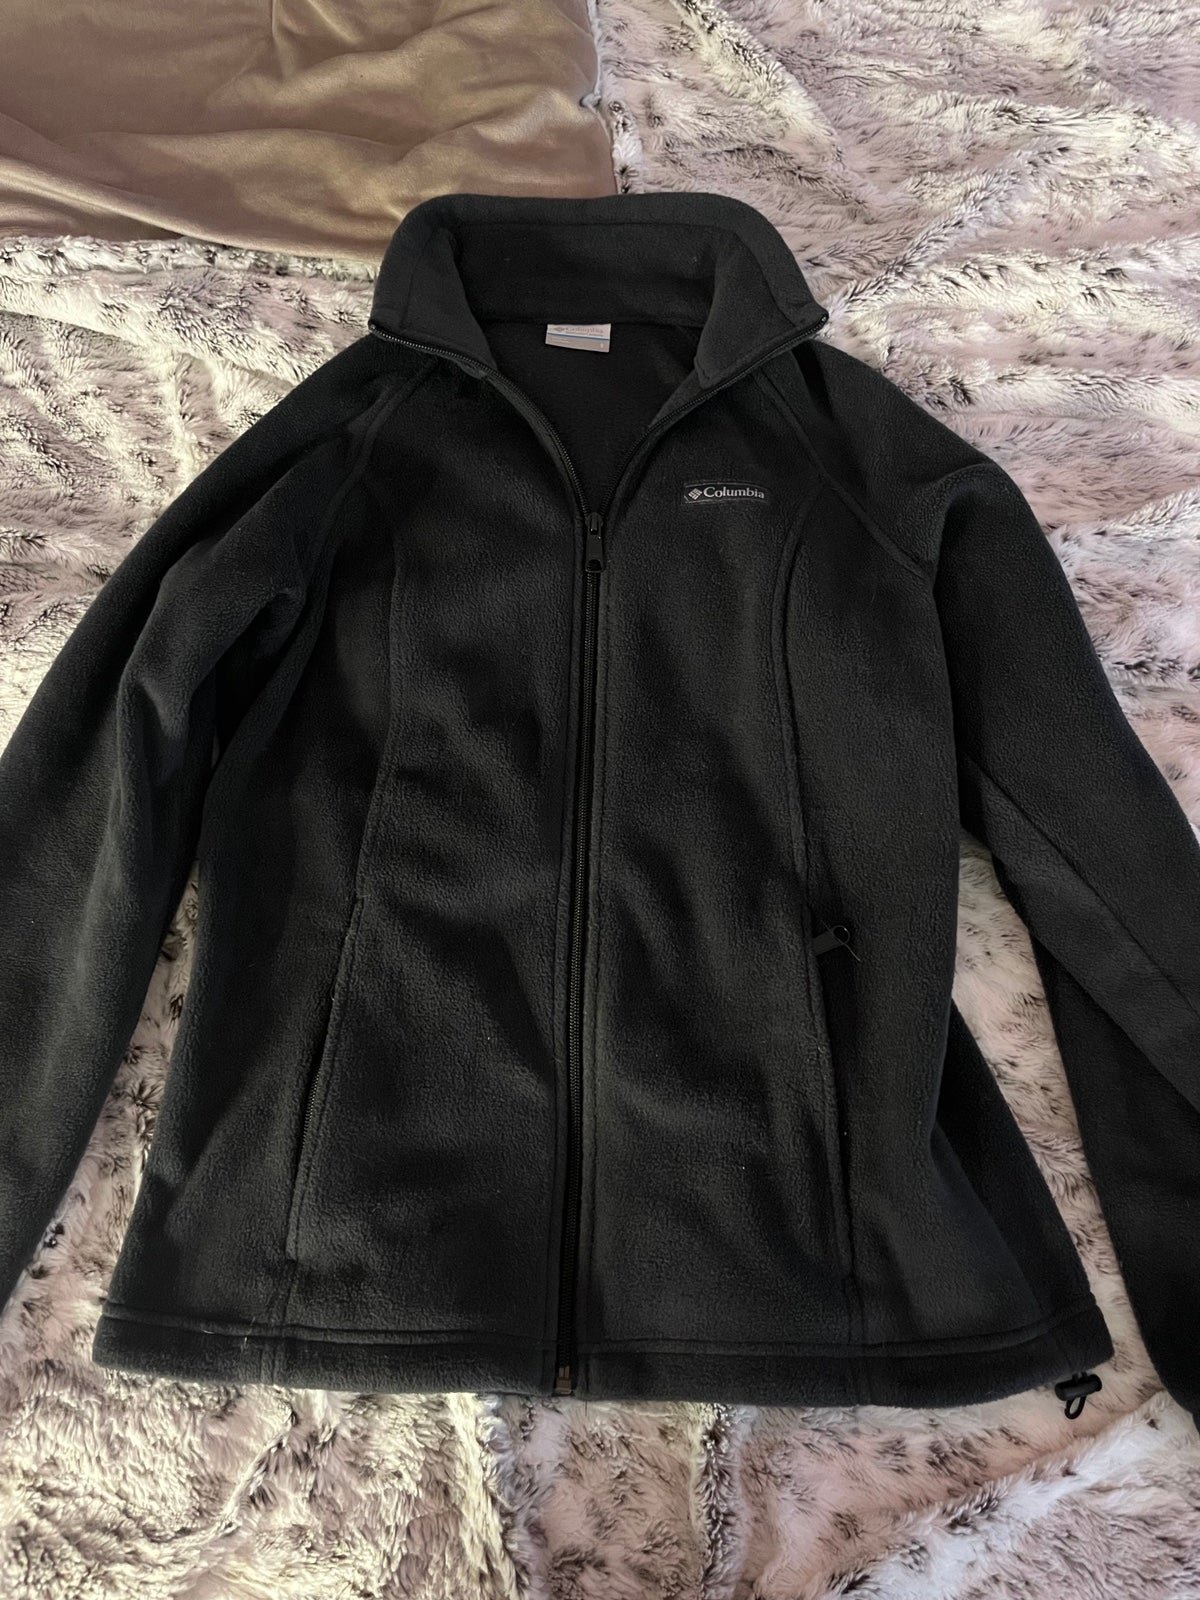 Amazing Columbia jacket owSY9x8Rs Hot Sale